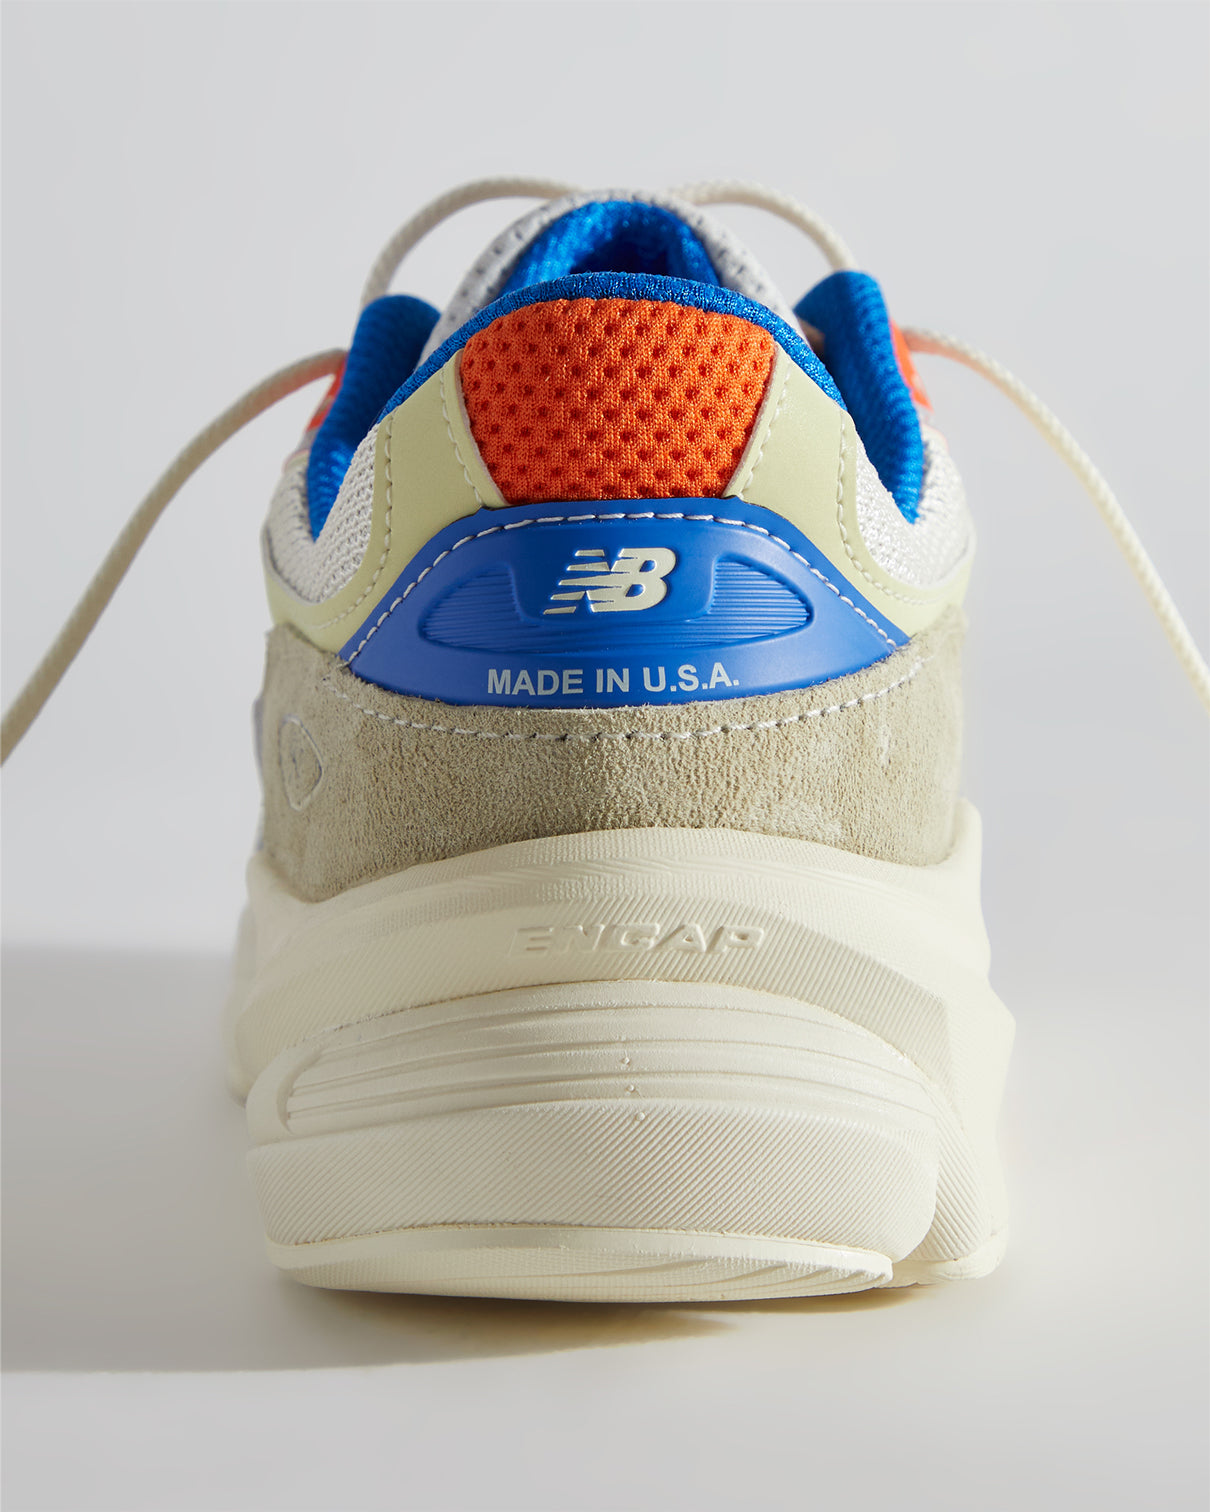 Wooly Mammoth New Balance 999 Pack